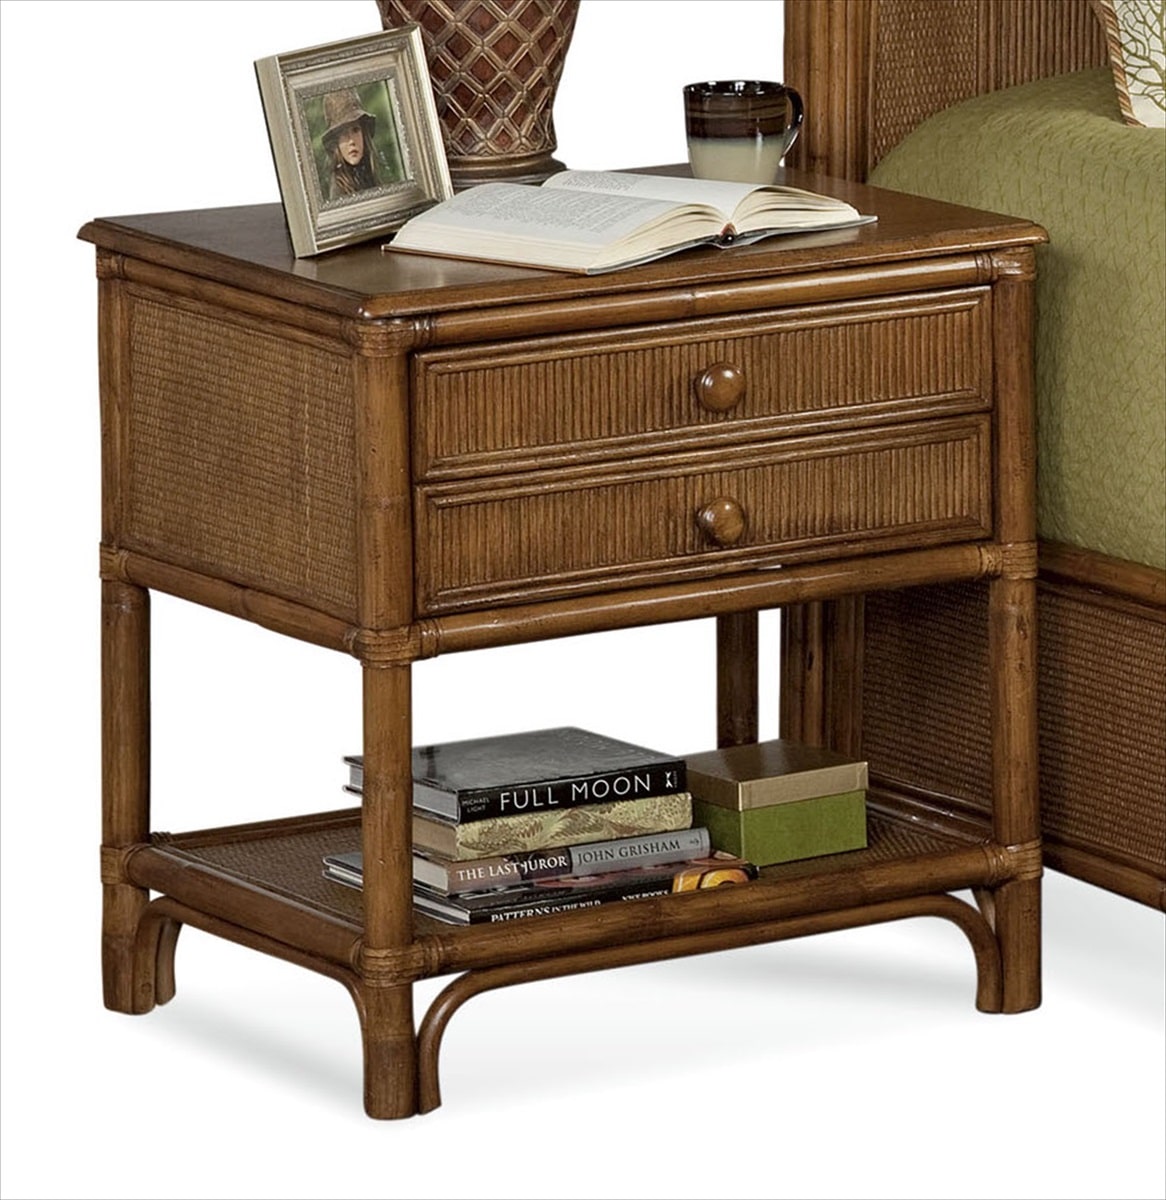 Summer Retreat Wicker and Rattan 2 Drawer Bedroom Nightstand Model 818-144 by Braxton Culler